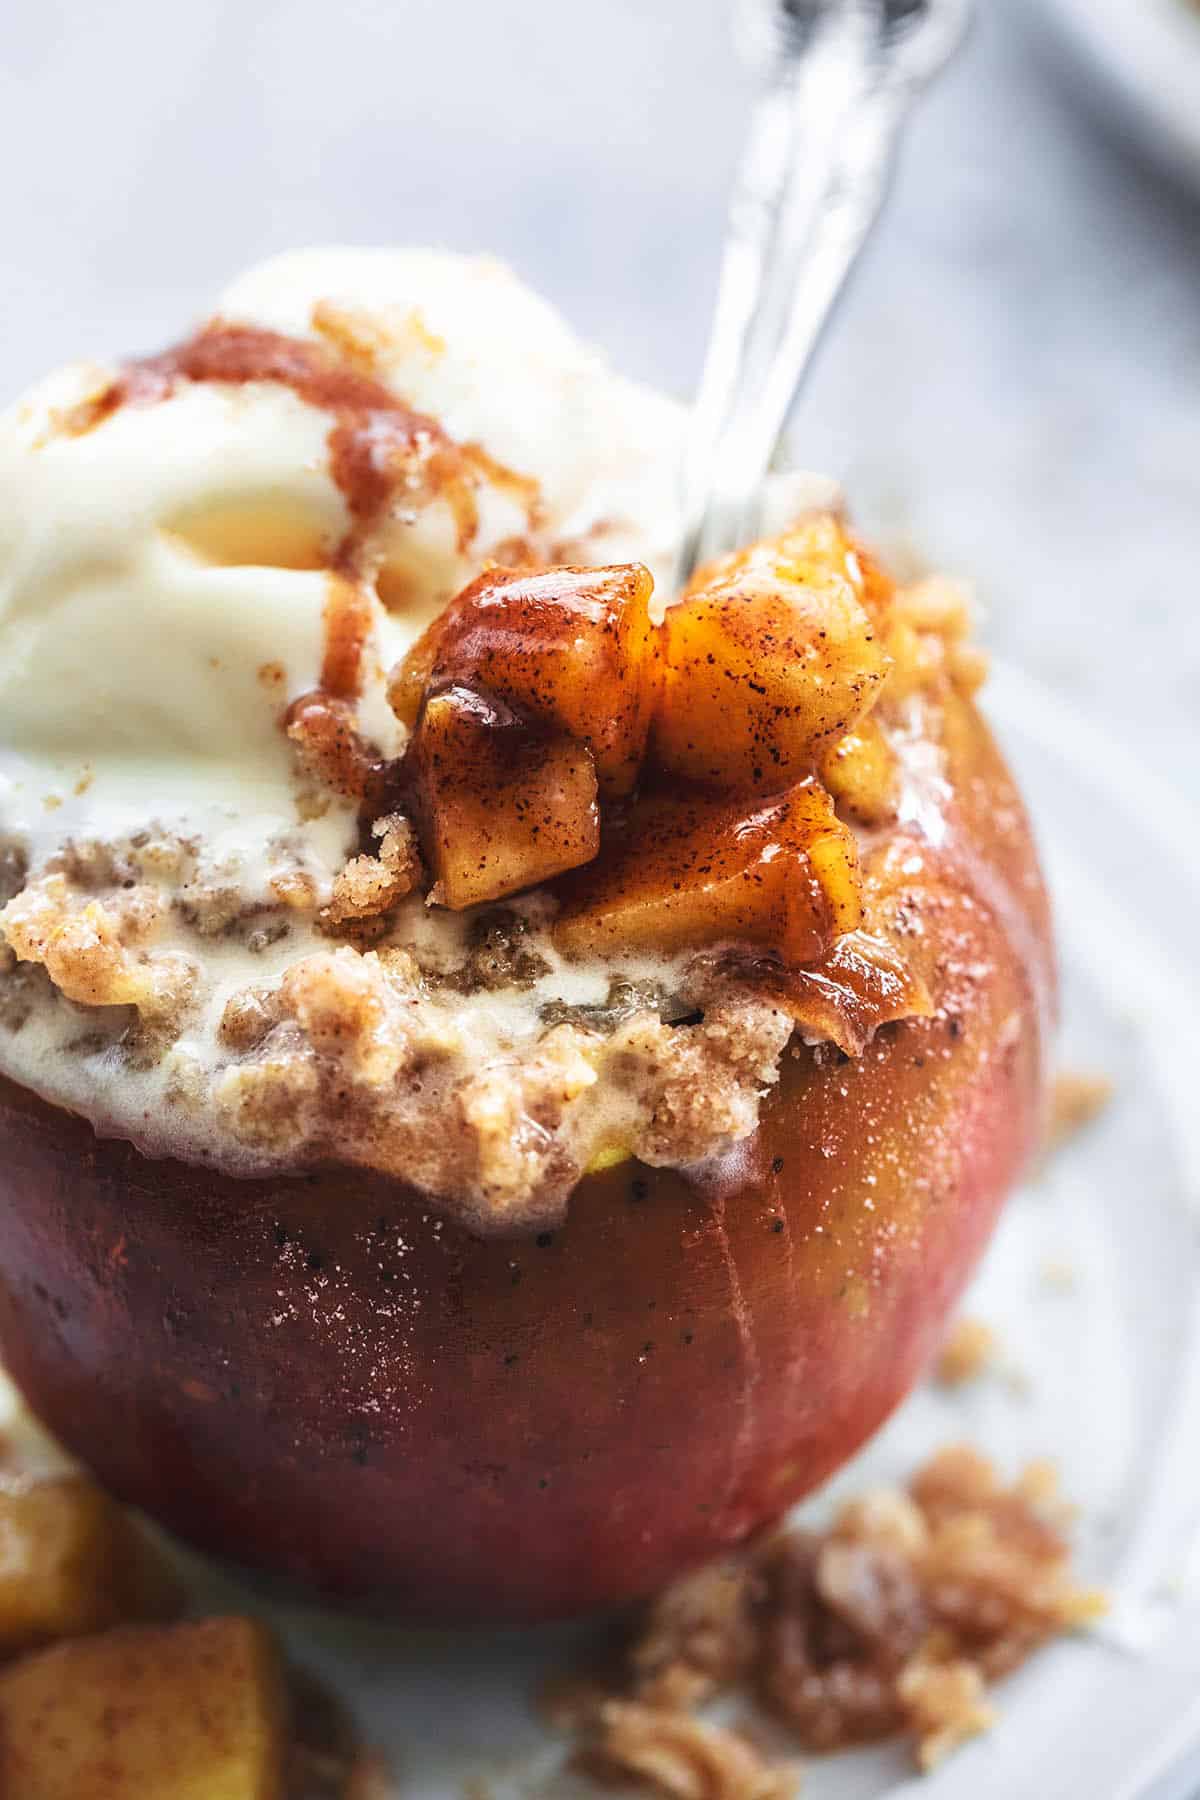 up close spoon digging into apple with filling and oat topping